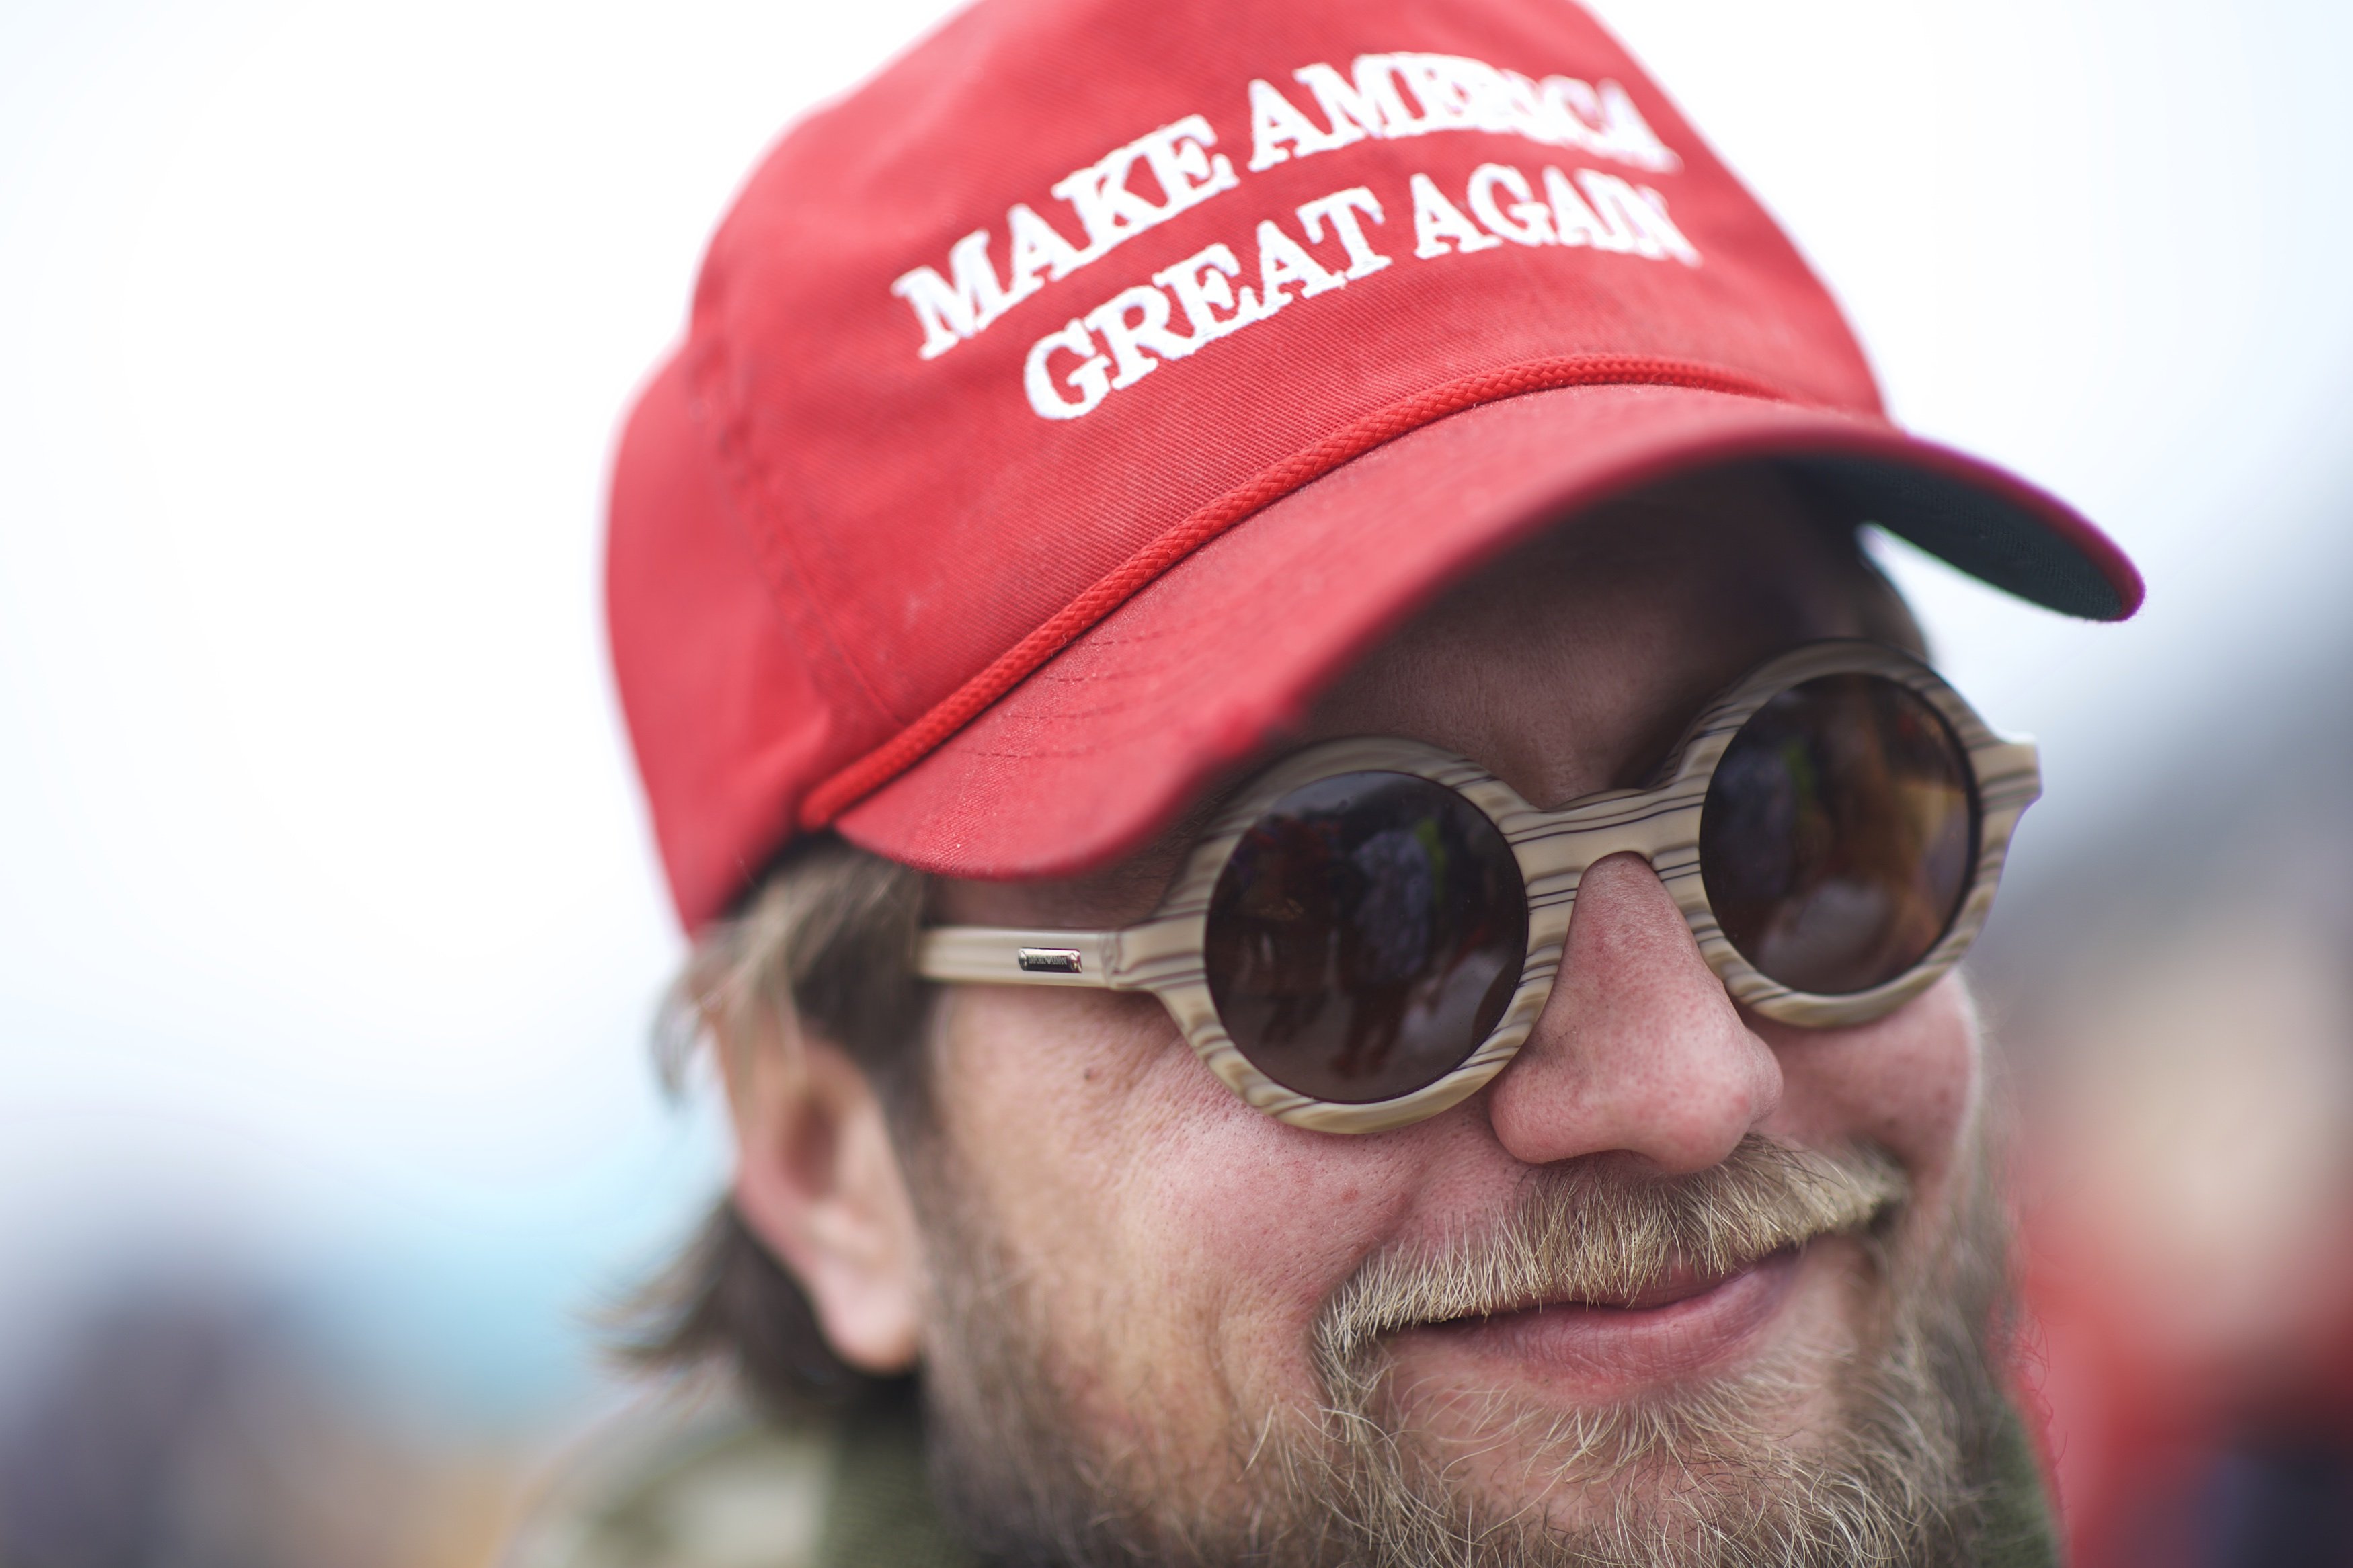 Man wearing a MAGA hat | Photo: Getty Images